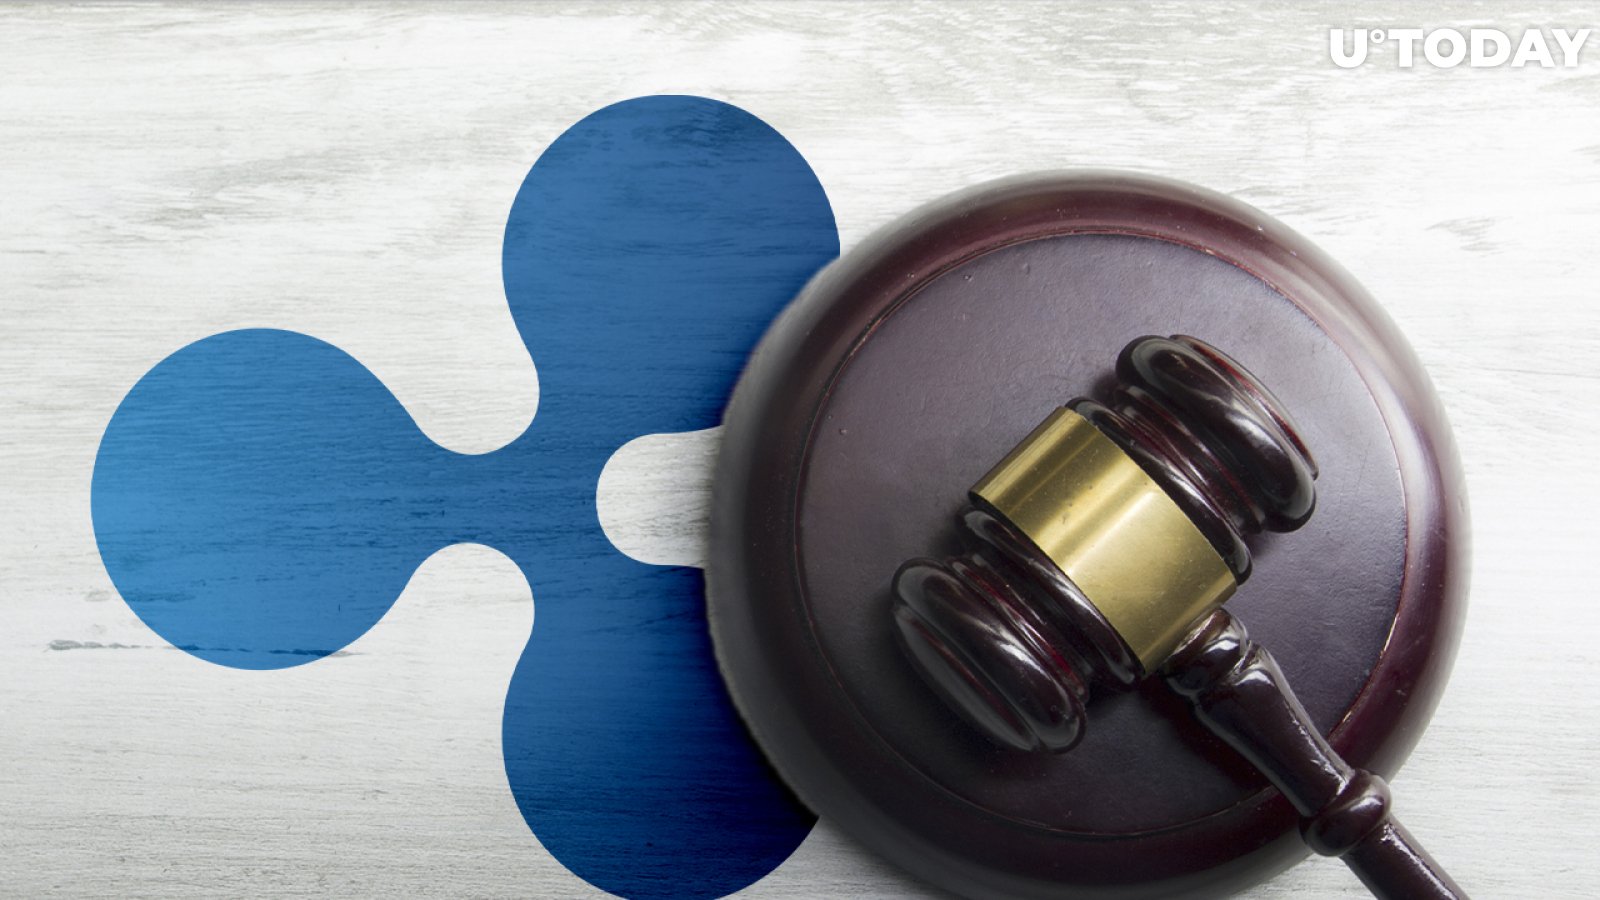 Ripple-SEC Lawsuit Is Expected to Be Over by April 2022, According to Jeremy Hogan